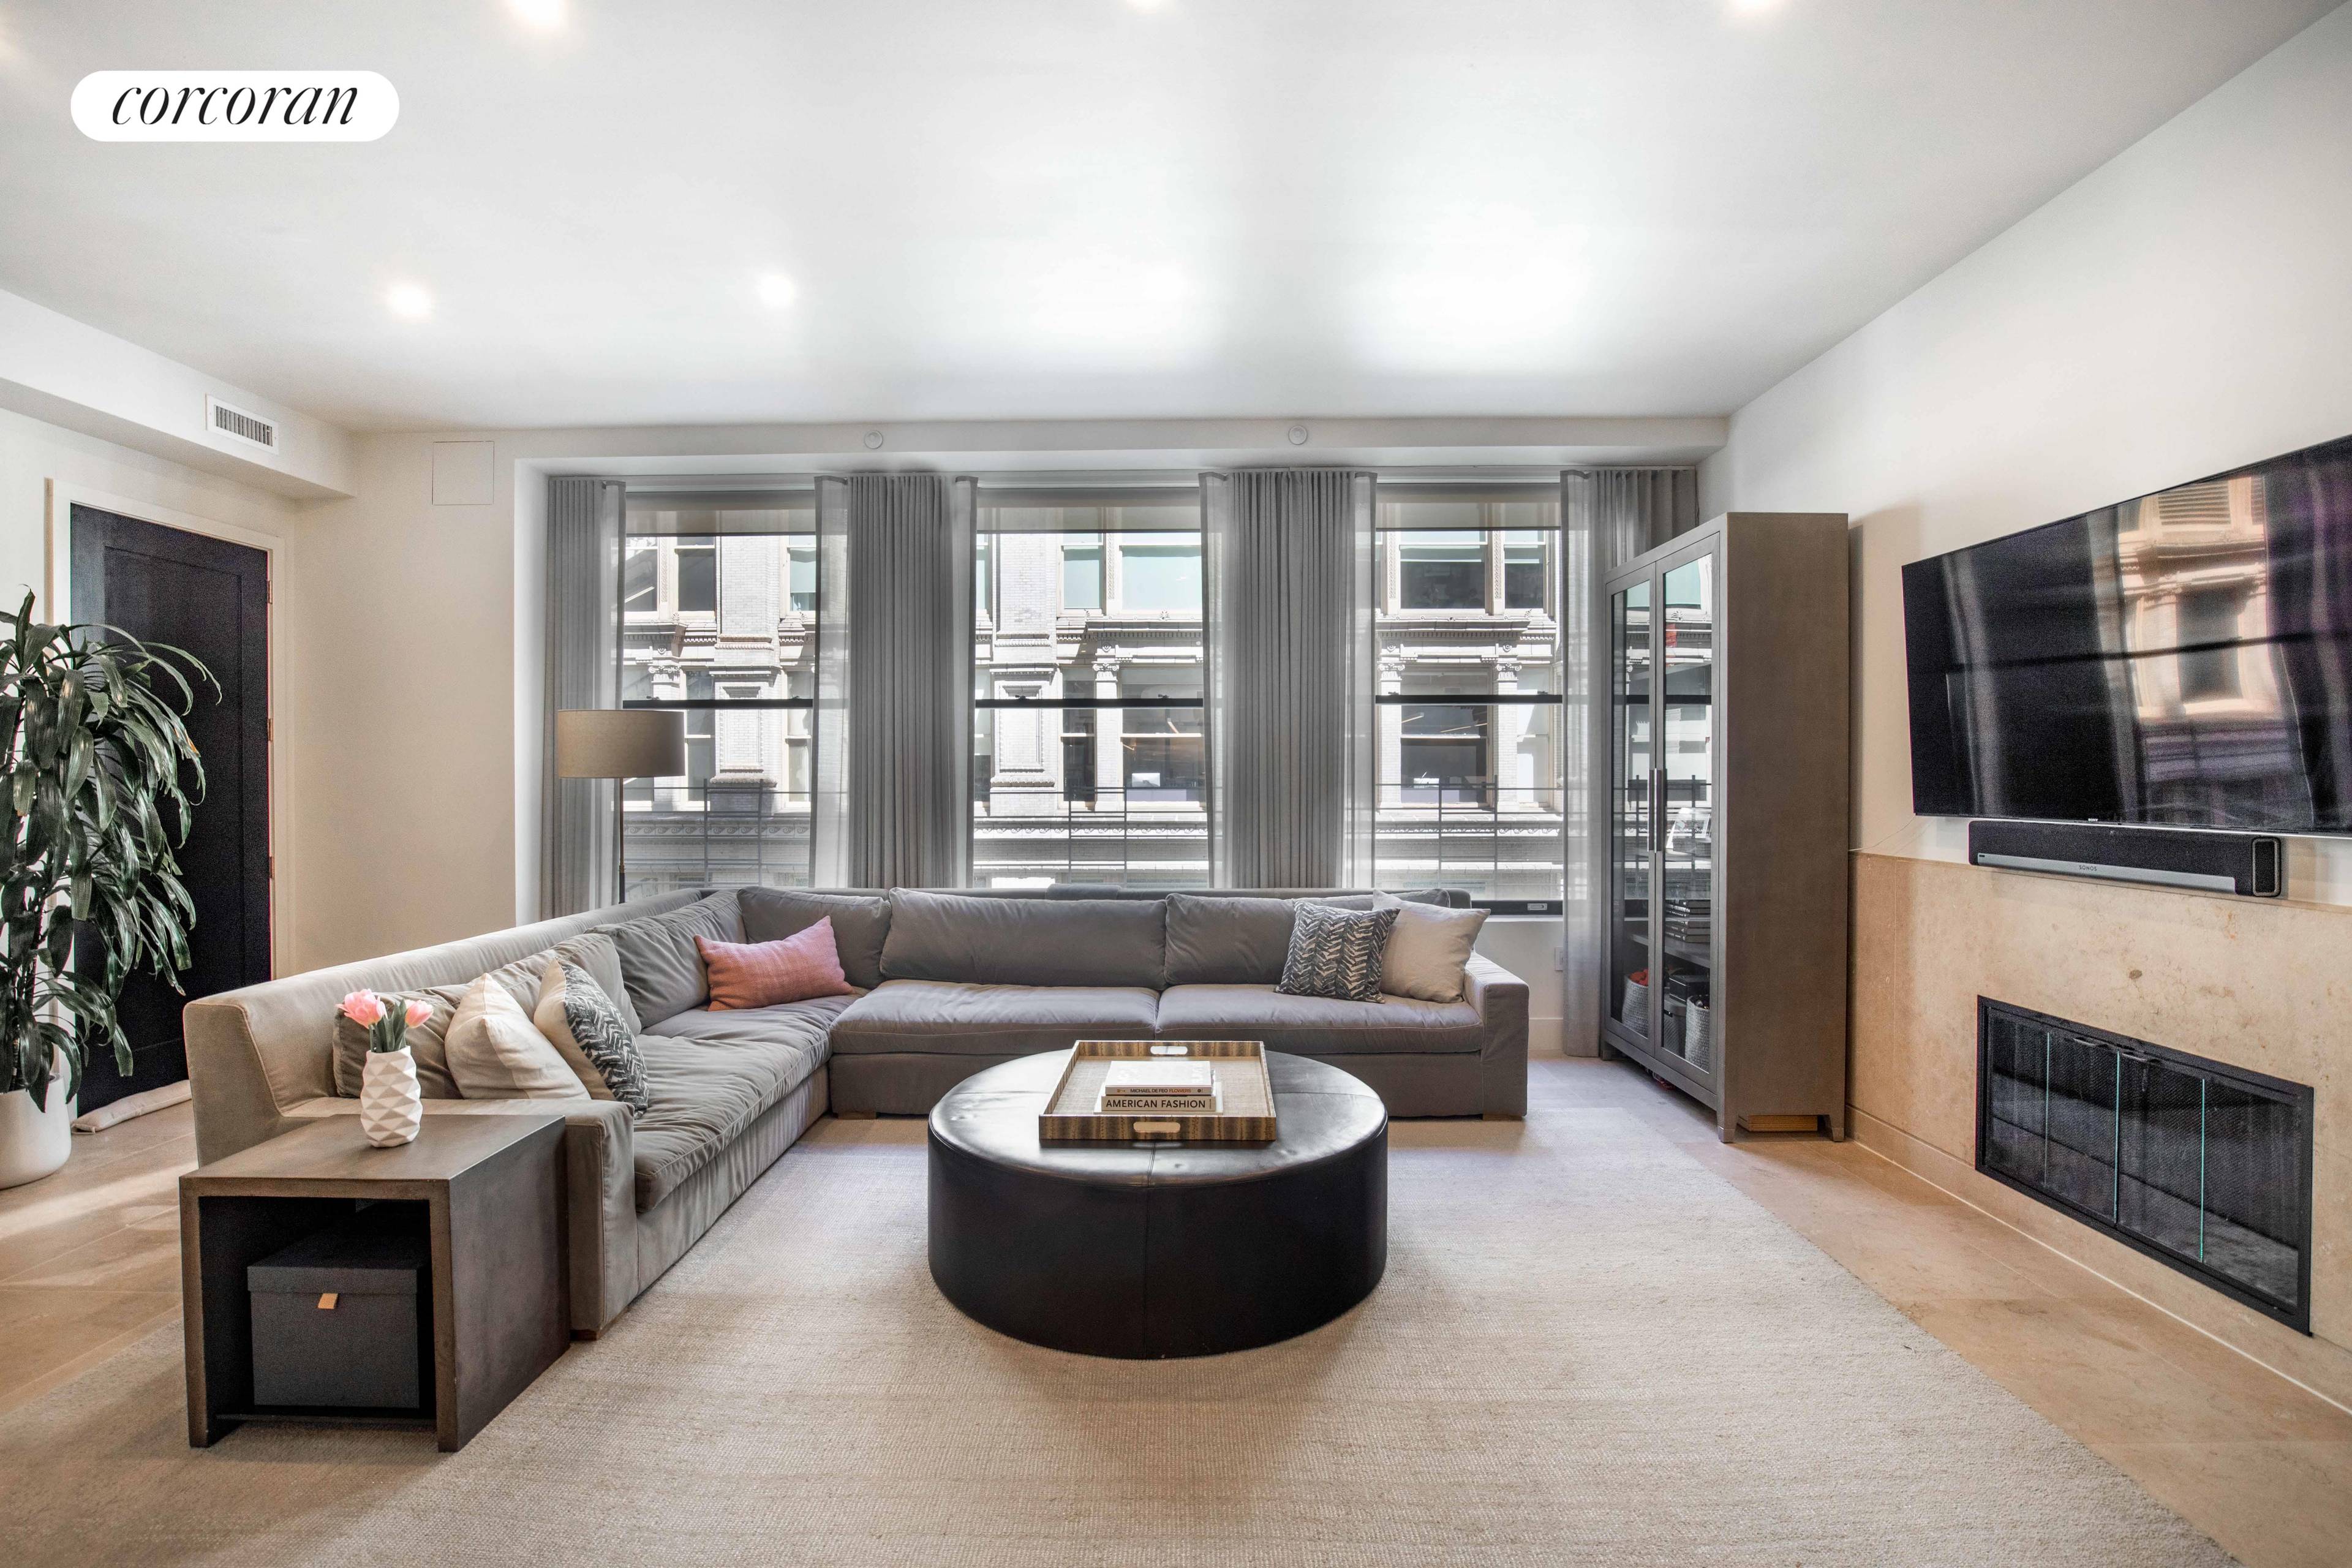 Located in the heart of the Flatiron District, this expansive and stylish 3 bedroom, 3 bathroom loft boasts soaring 10 foot ceilings, oversized windows and a wood burning fireplace.